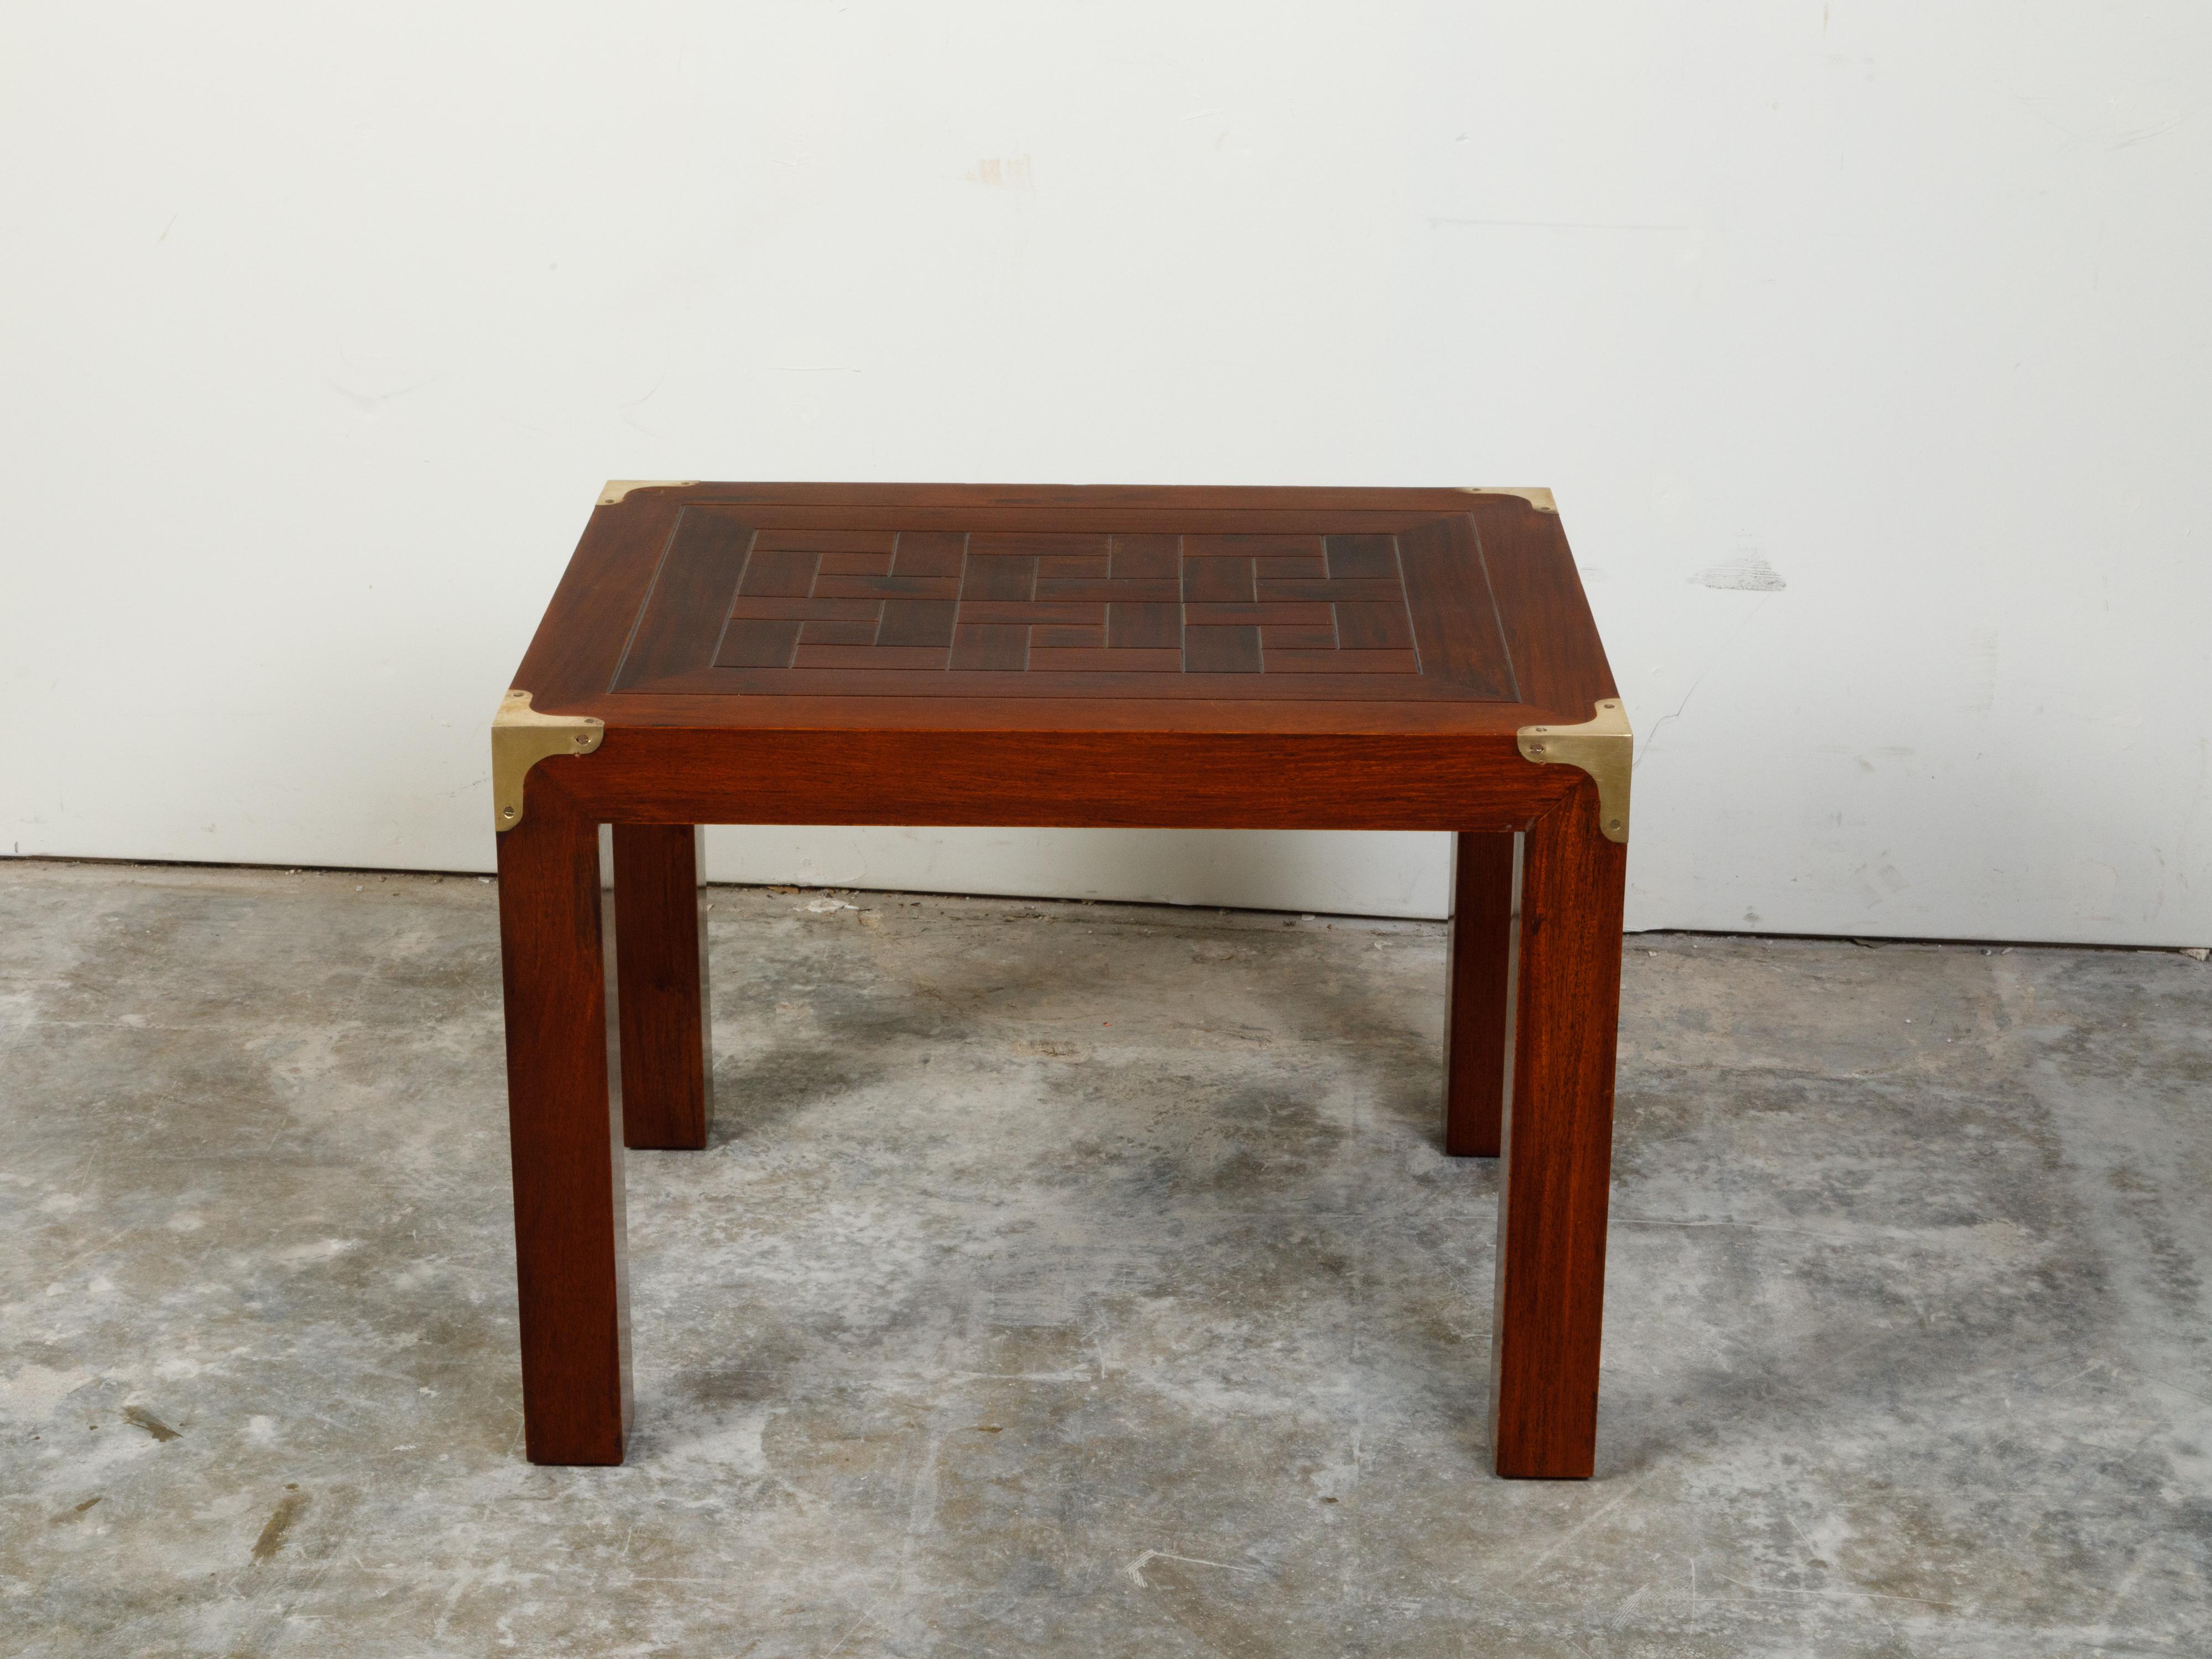 An English Campaign style walnut side table from the mid 20th century, with parquet style top, brass accents and straight legs. Created in England during the midcentury period, this walnut Campaign side table features an interesting rectangular top